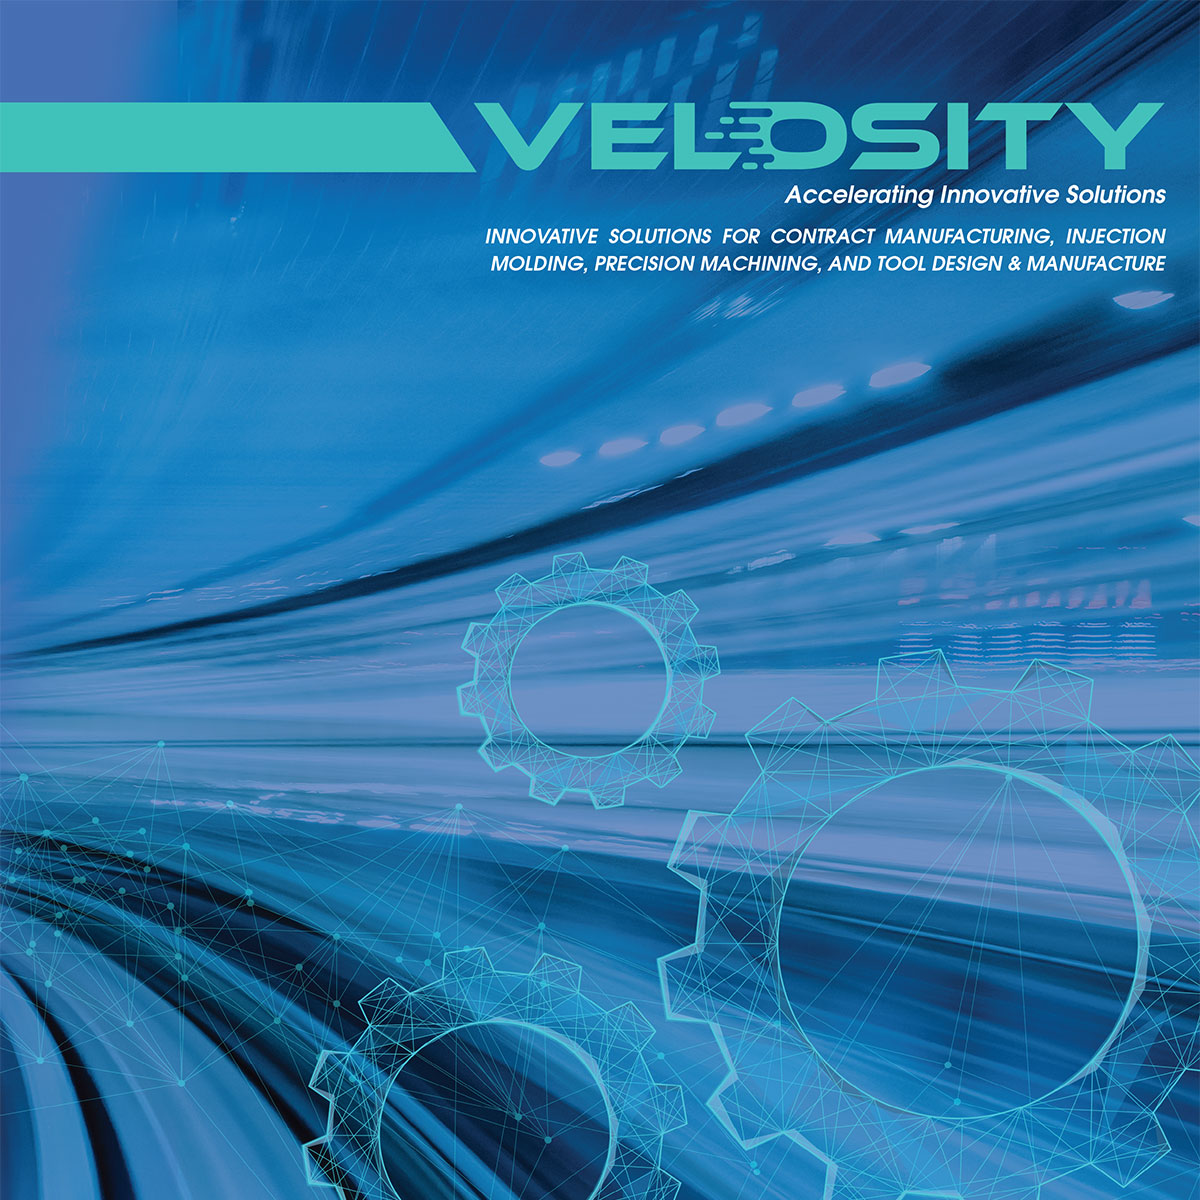 Discover our wide variety of brochures, each providing an in-depth look at our products and services. Today, we present our latest addition: Velosity's Company Overview Brochure. velosity.com/overview/compa…